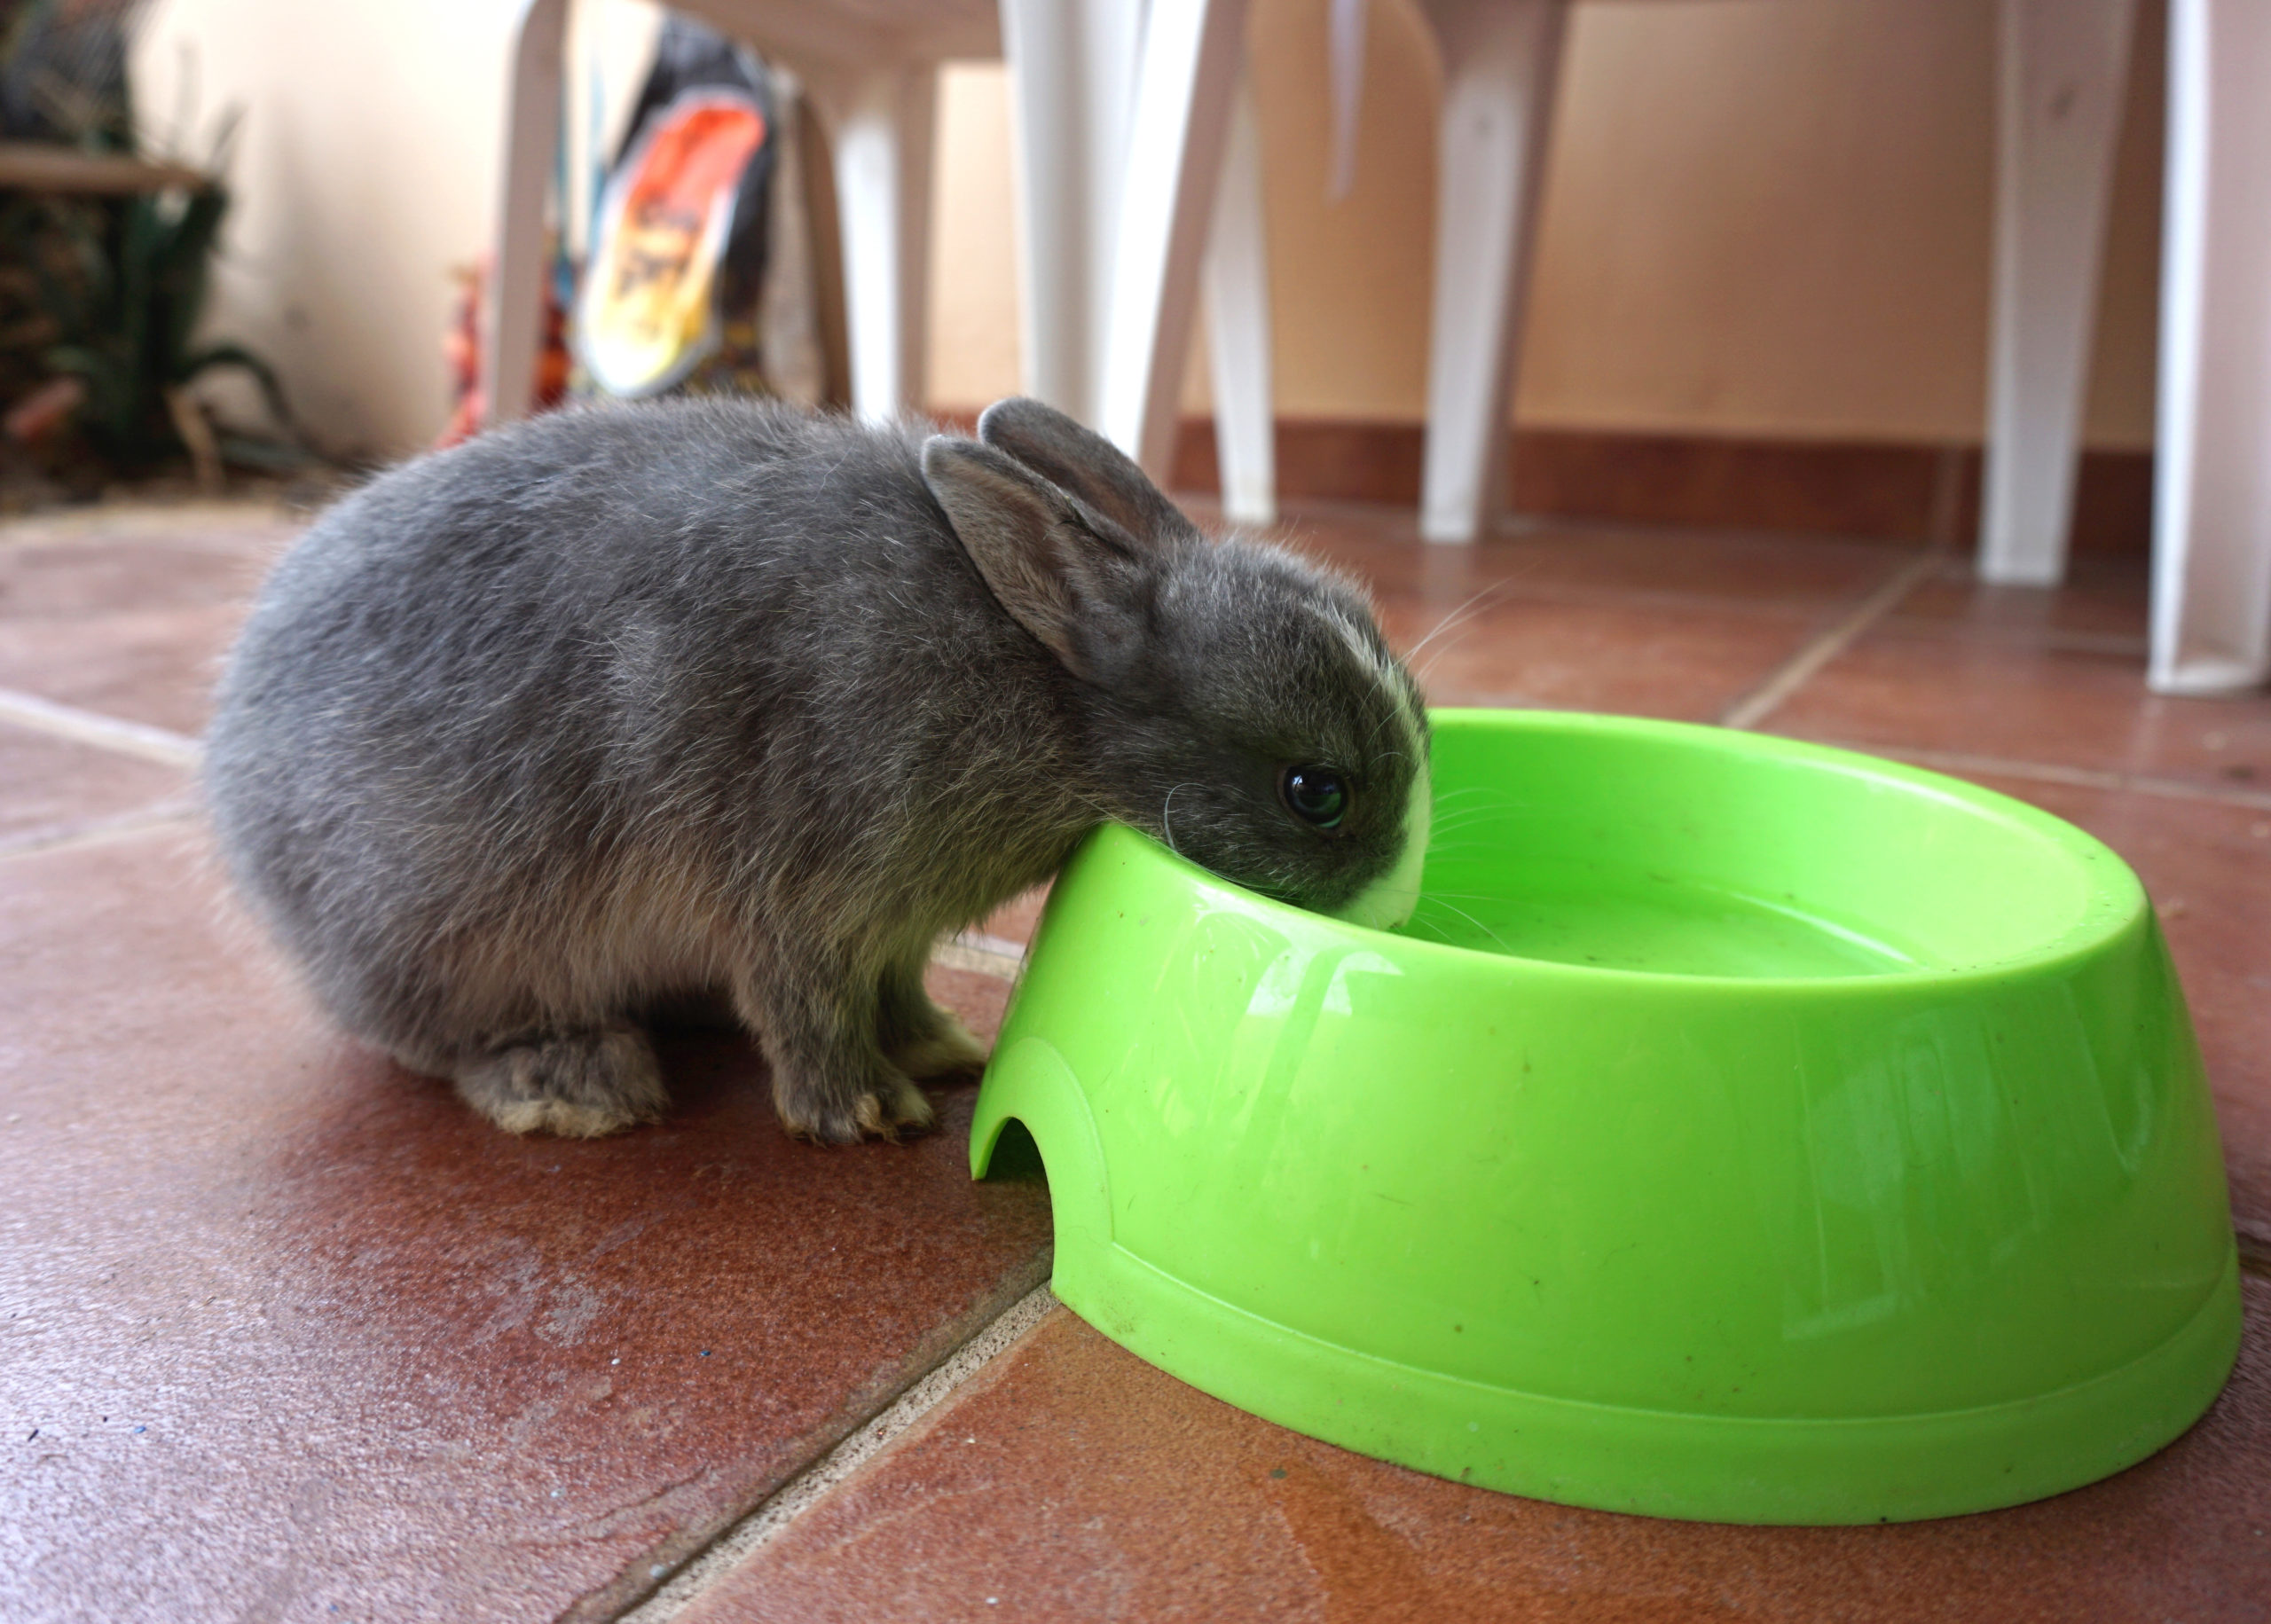 Rabbit drinking water out of a bowl